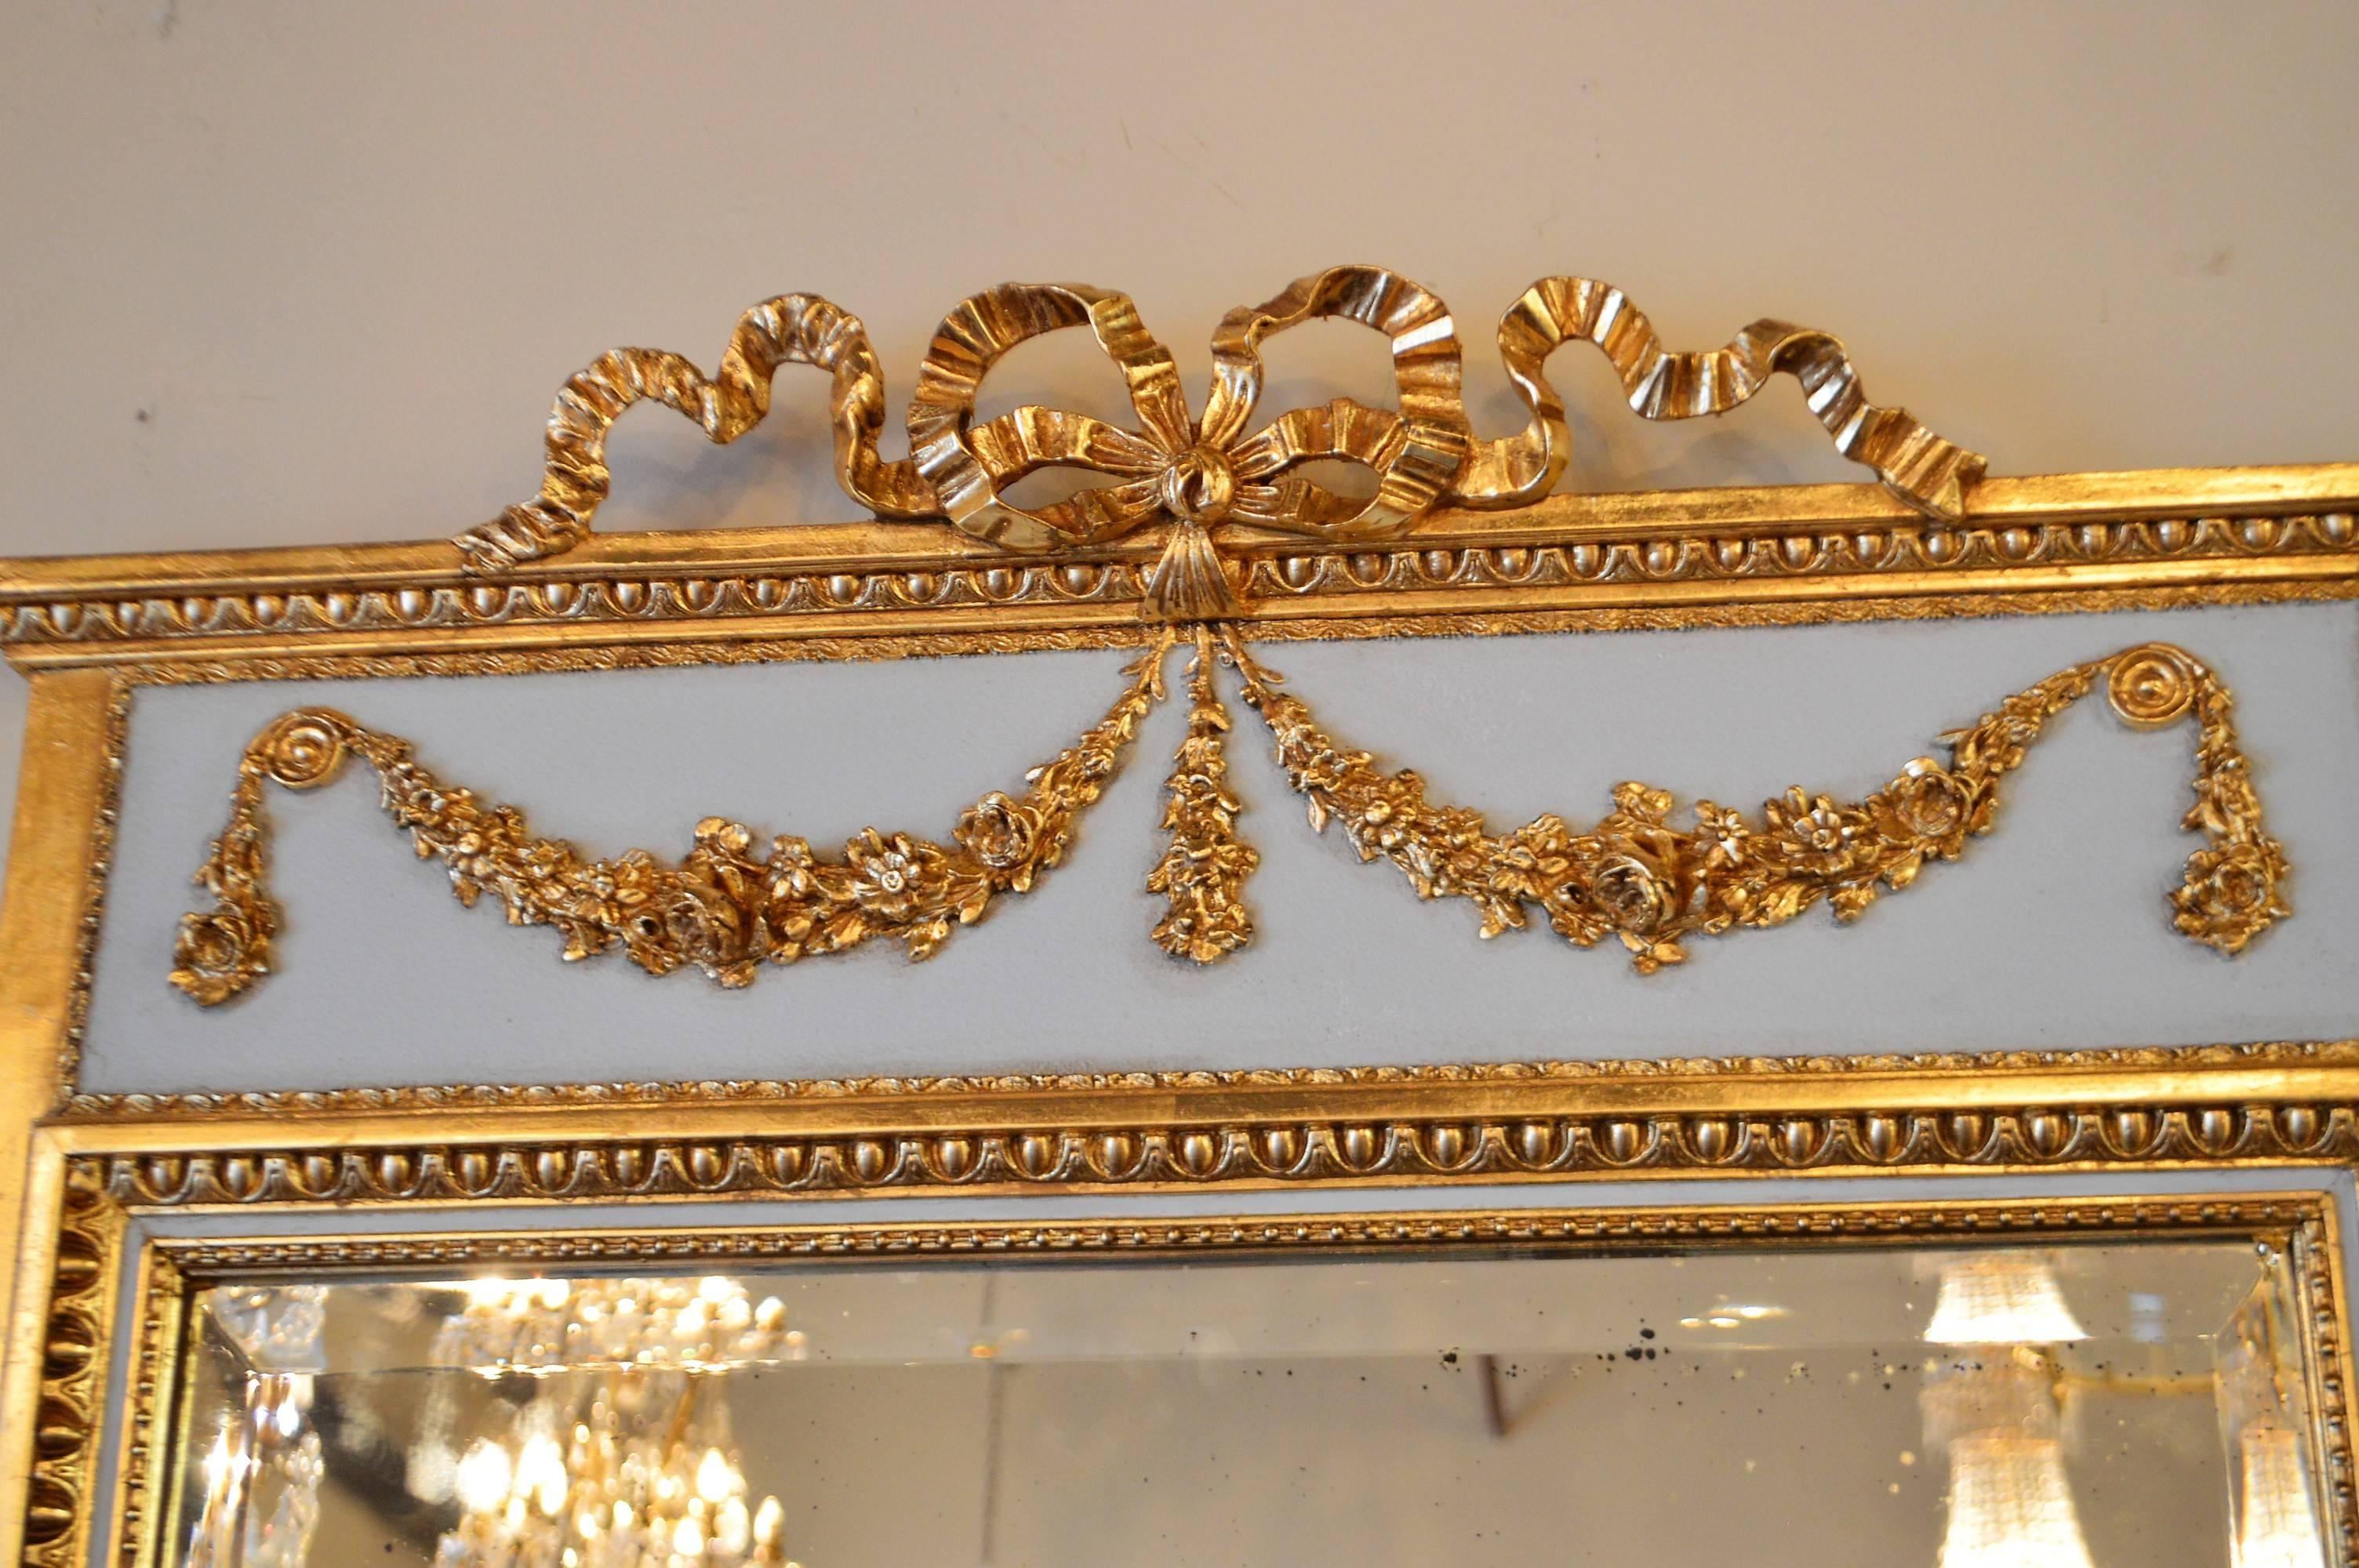 Elegant Louis XVI style trumeau mirror painted and gilt over wood, attractive pale blue is stunning next to the bright gilding. The decorative details including the Louis XVI style bow are all hand-carved. The mirror shows some age.